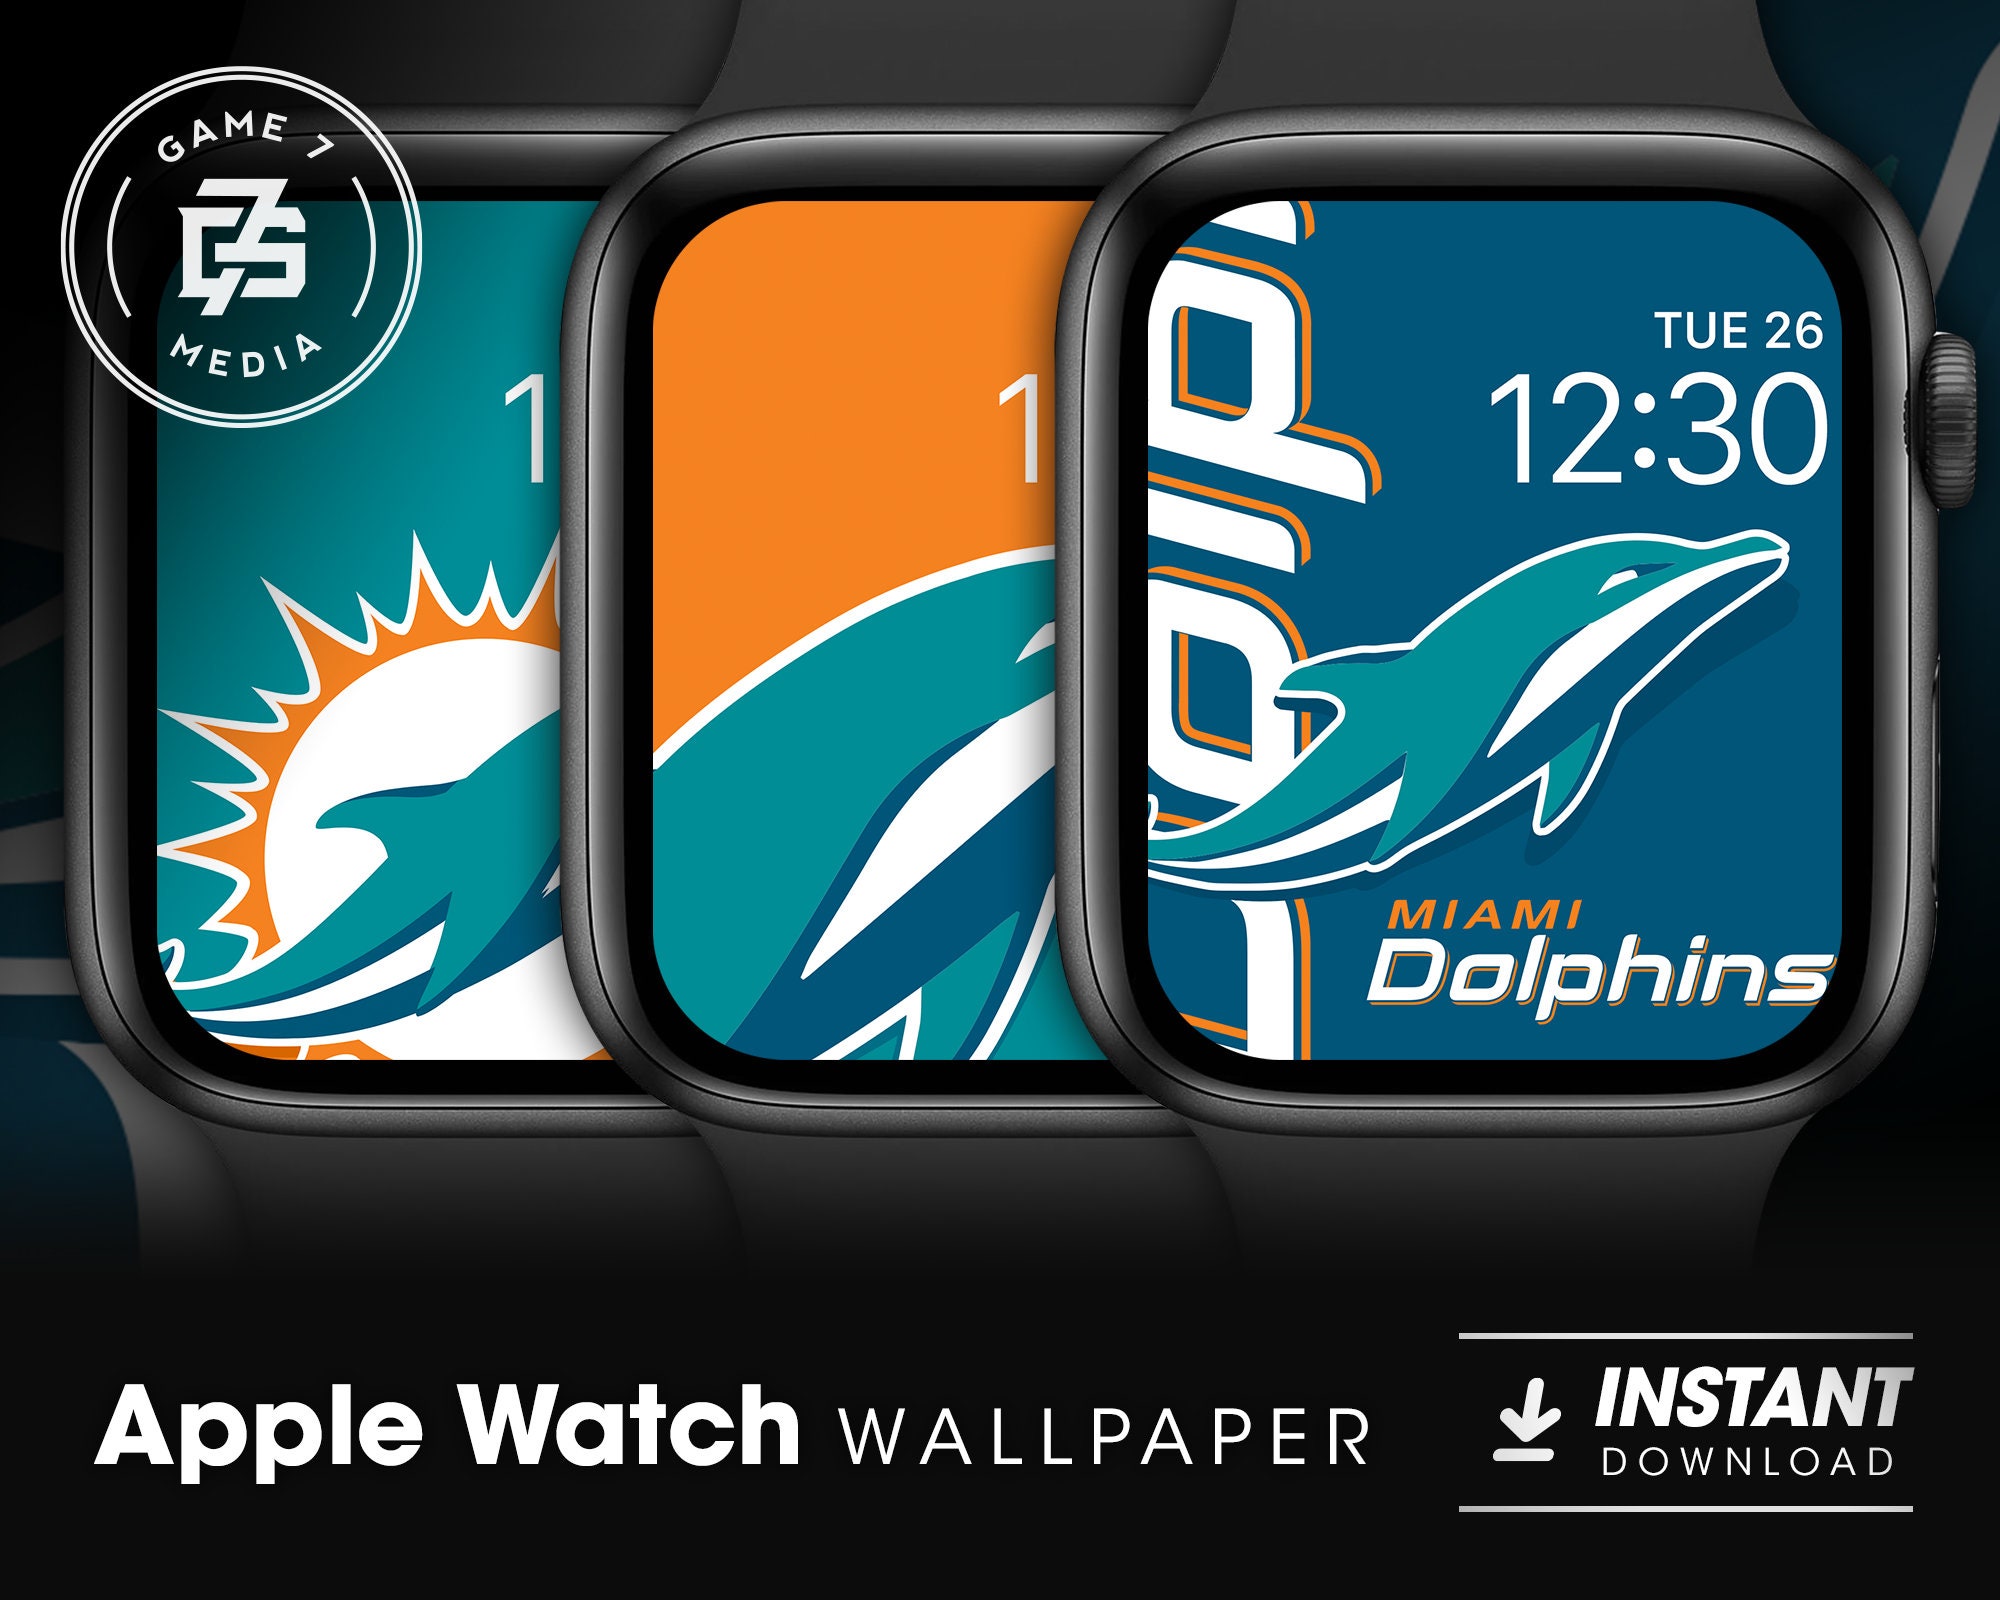 Miami Dolphins Football NFL Apple Watch Wallpaper Background - Etsy